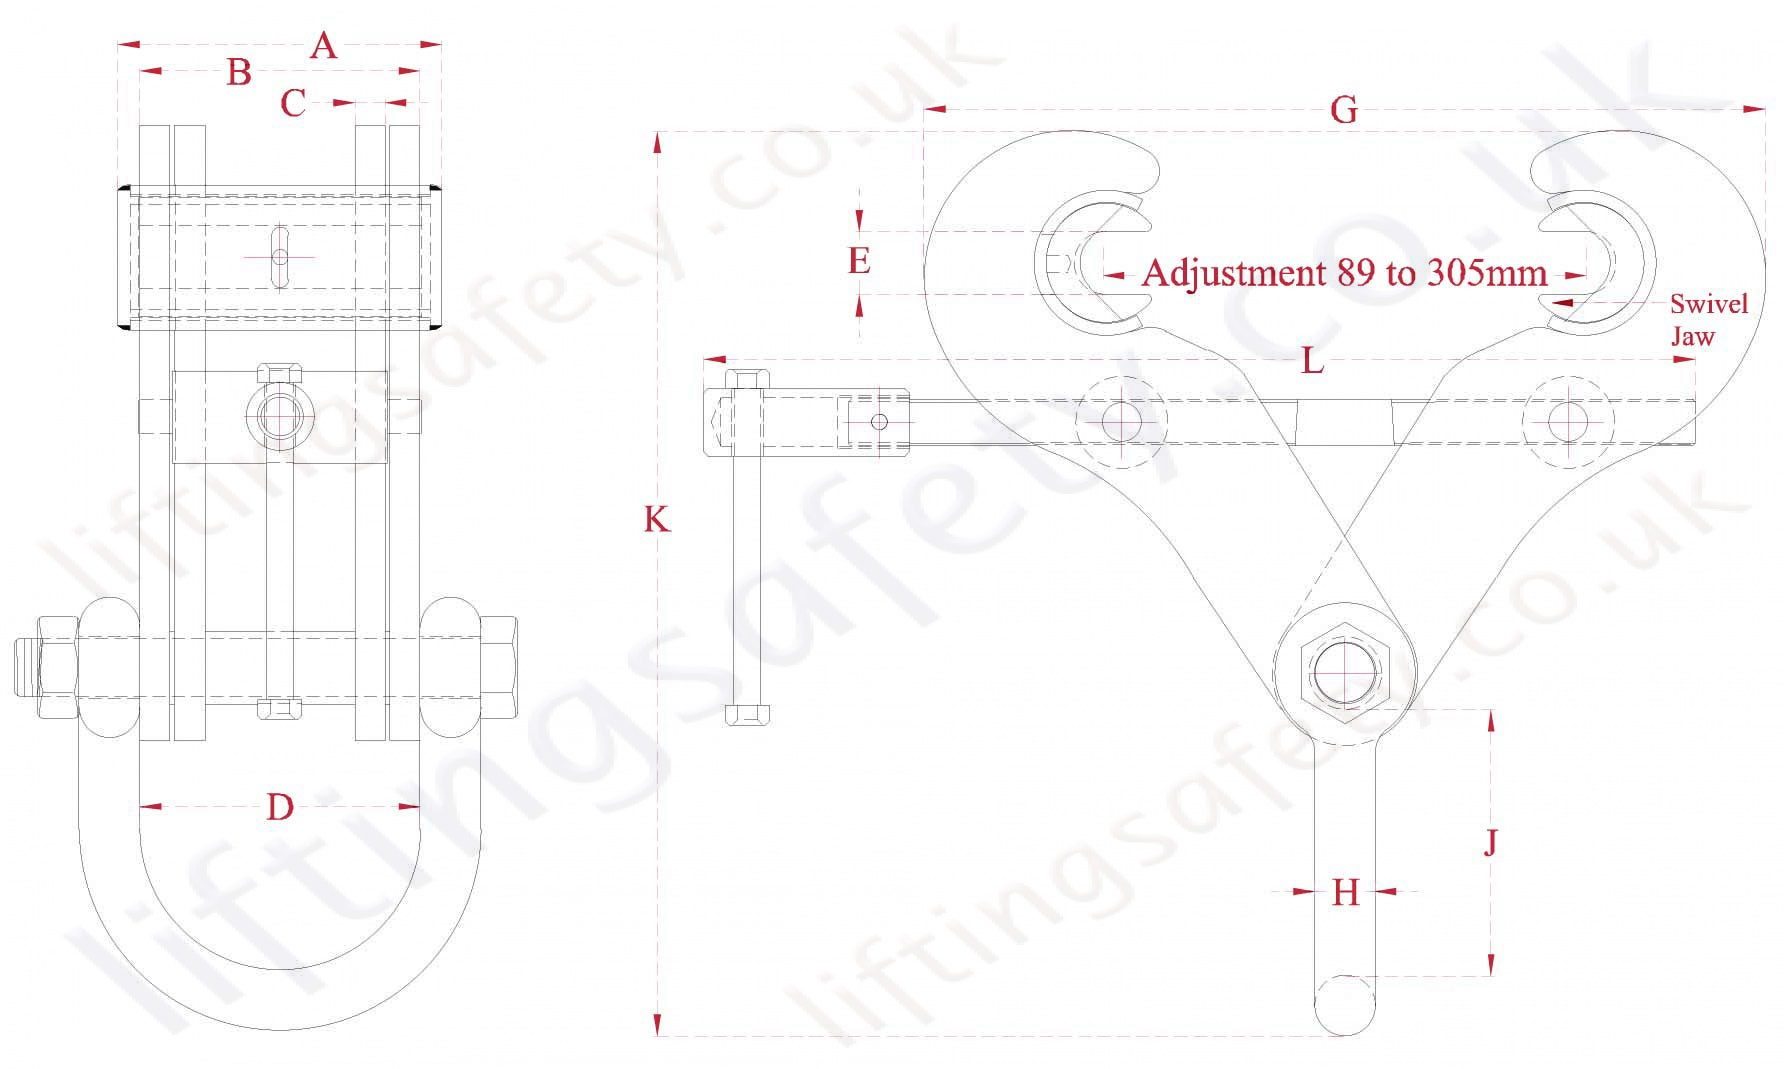 Superclamp Swivel Jaw Beam Clamp Dimensions